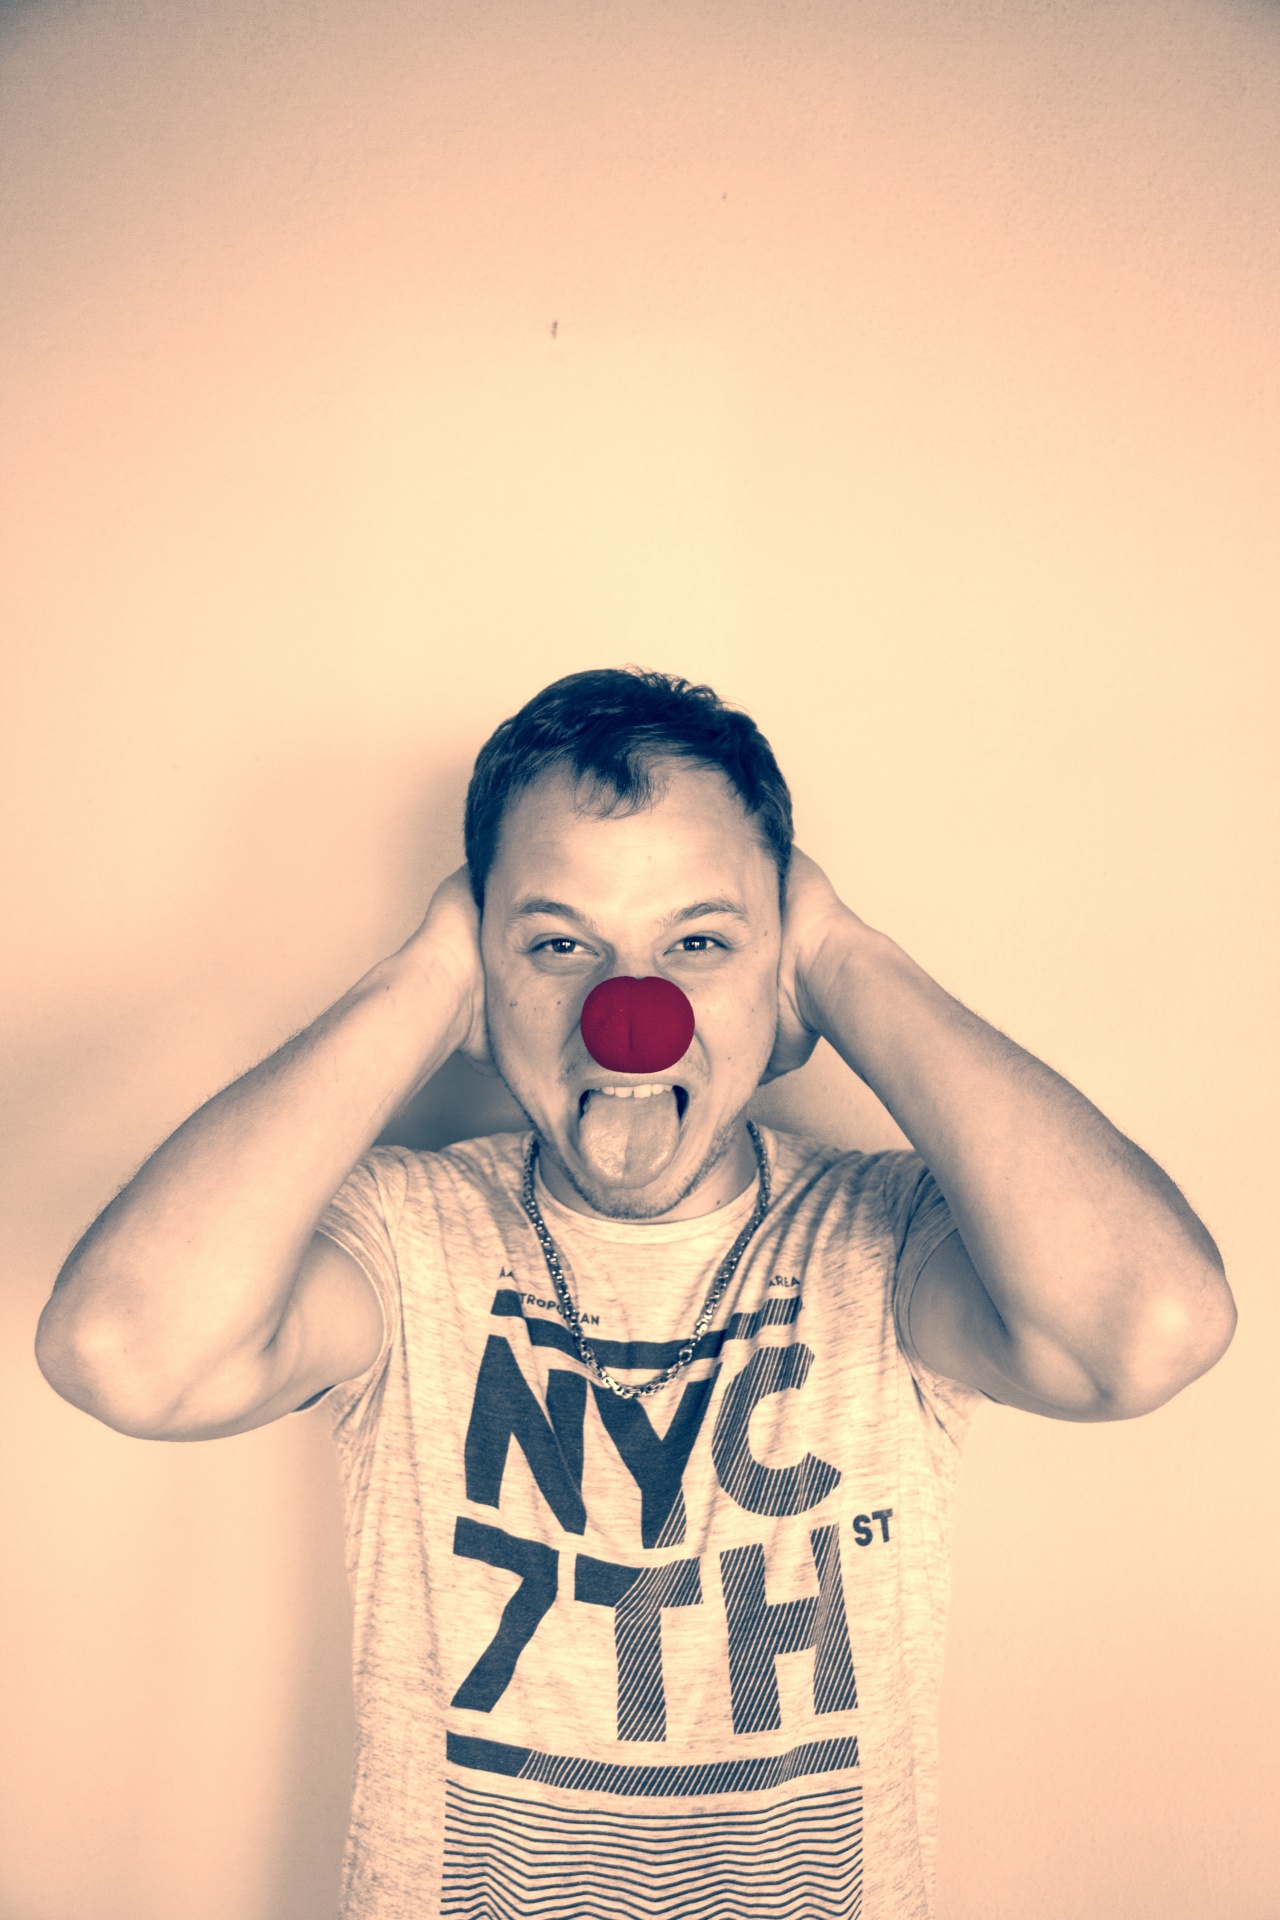 red nose clown free photo